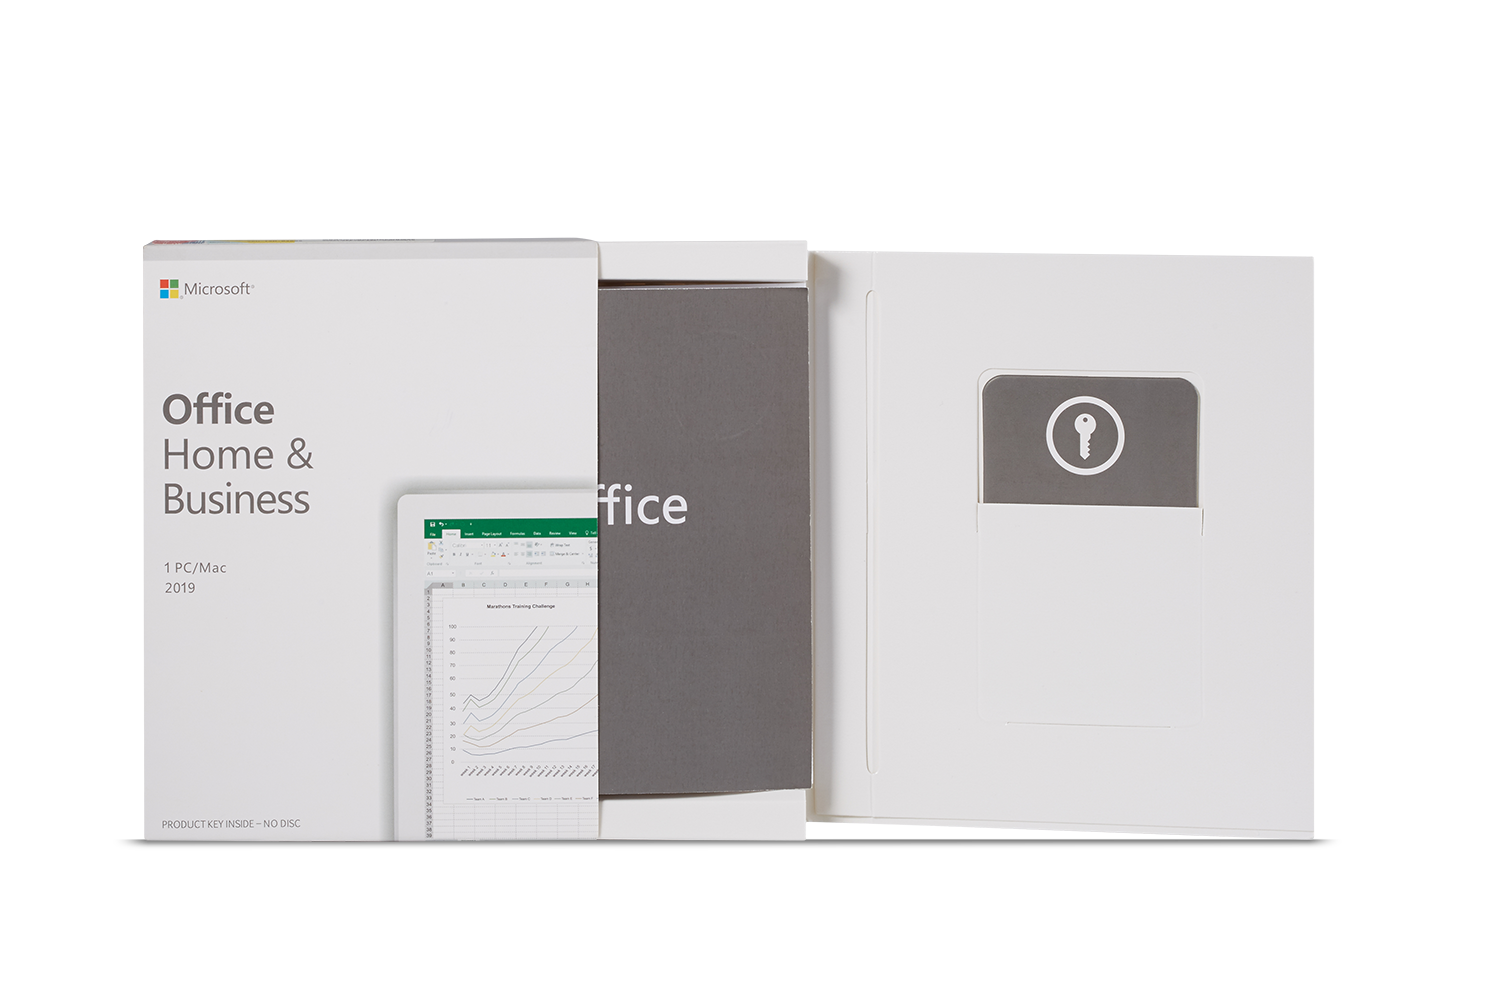 office home & student 2016 for mac fpp